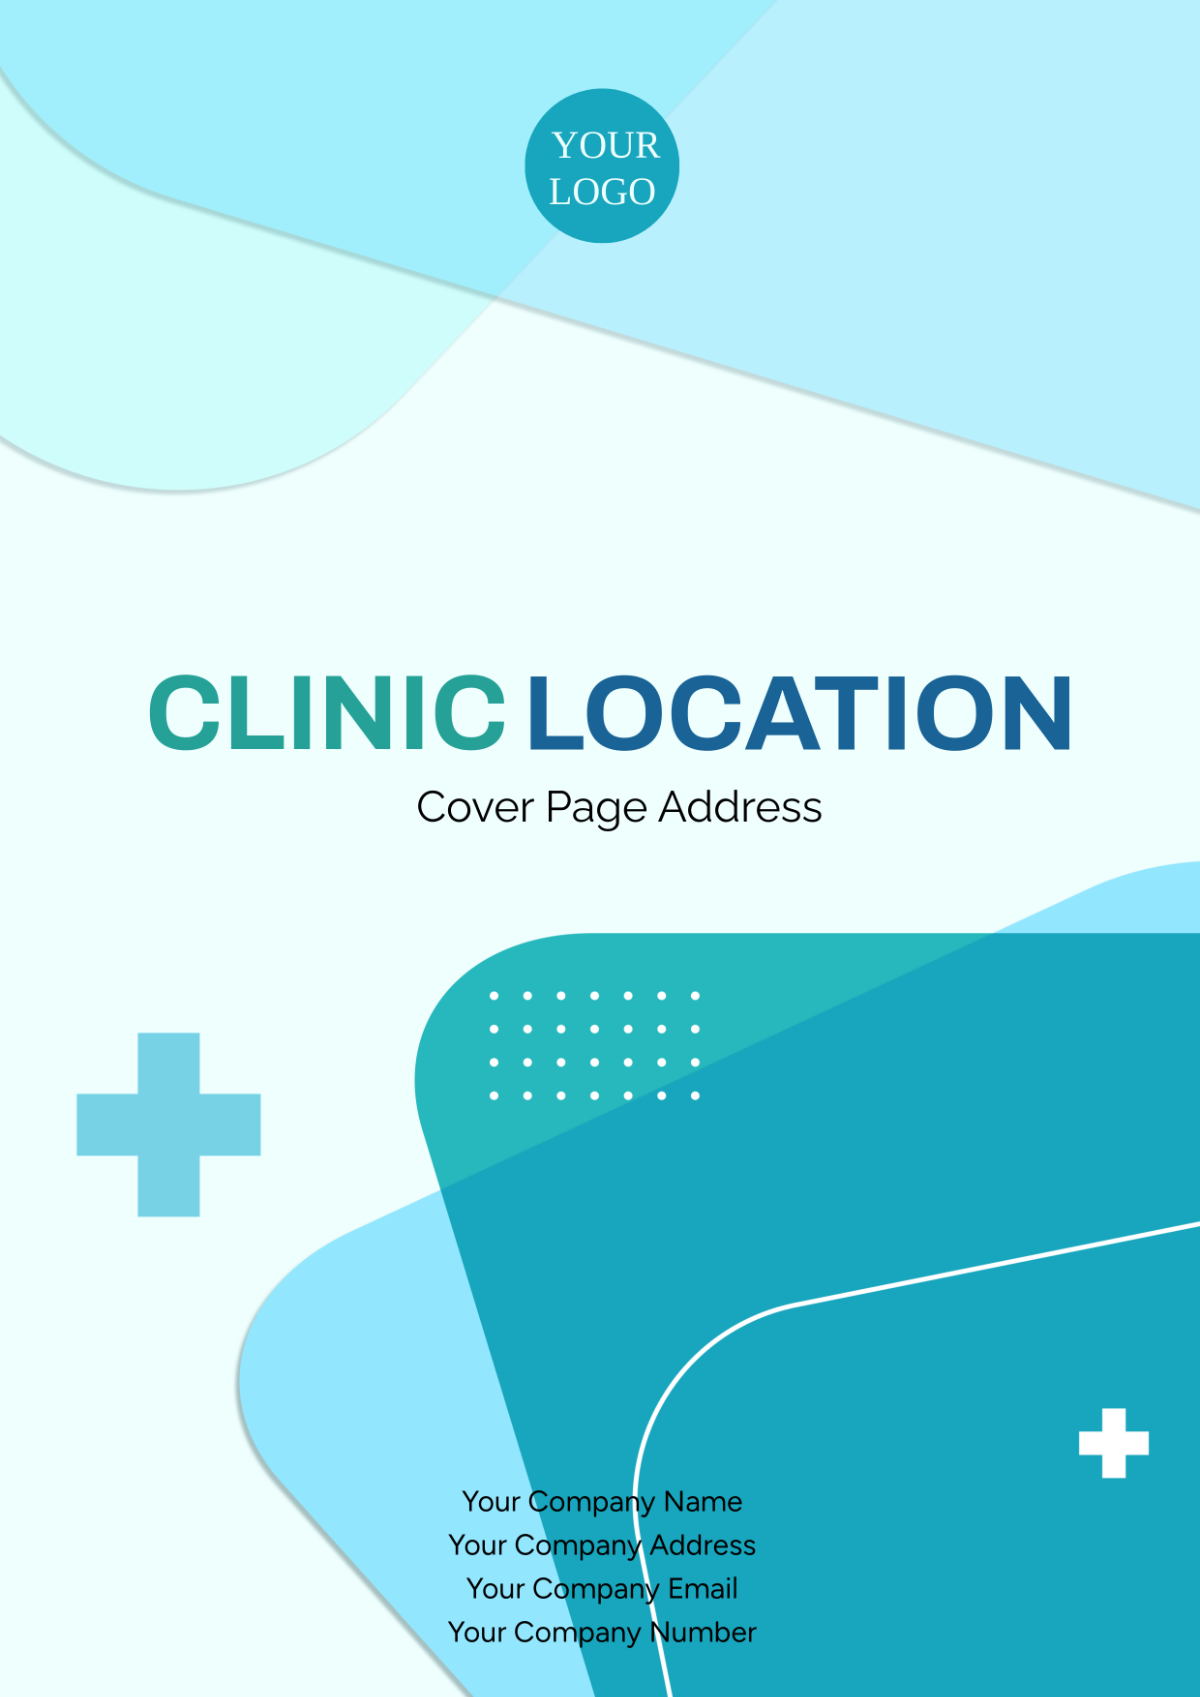 Clinic Location Cover Page Address